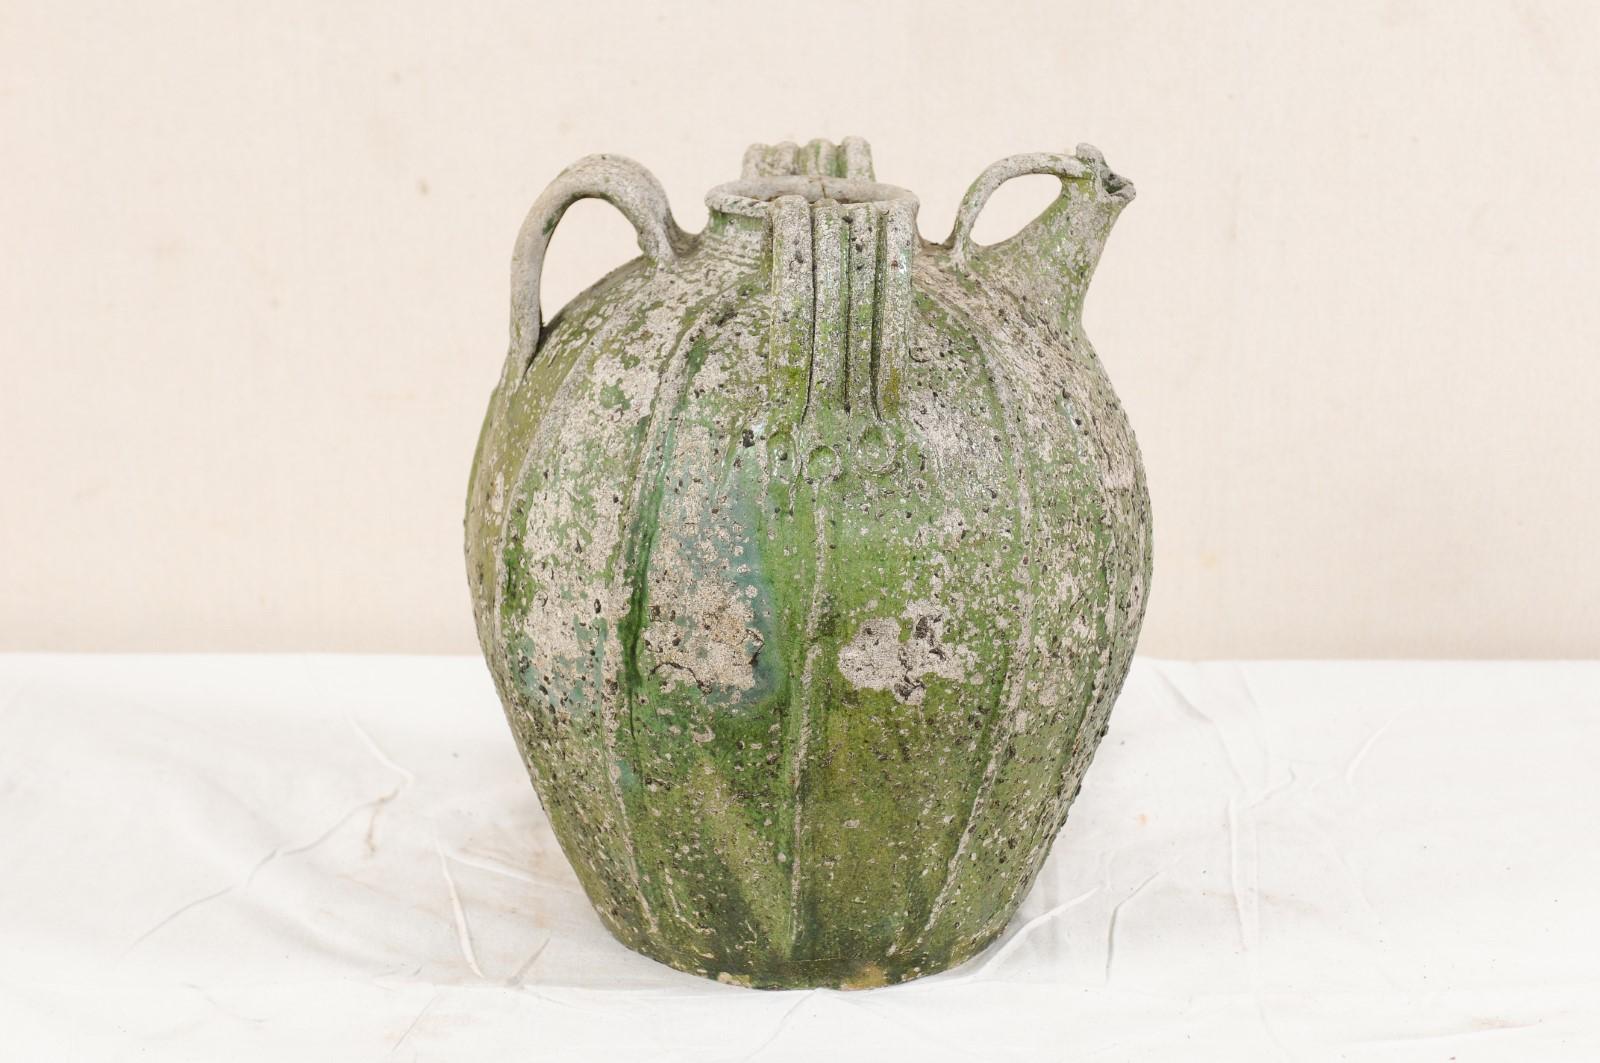 French Terracotta Jar in Green Hues from the 19th Century 1